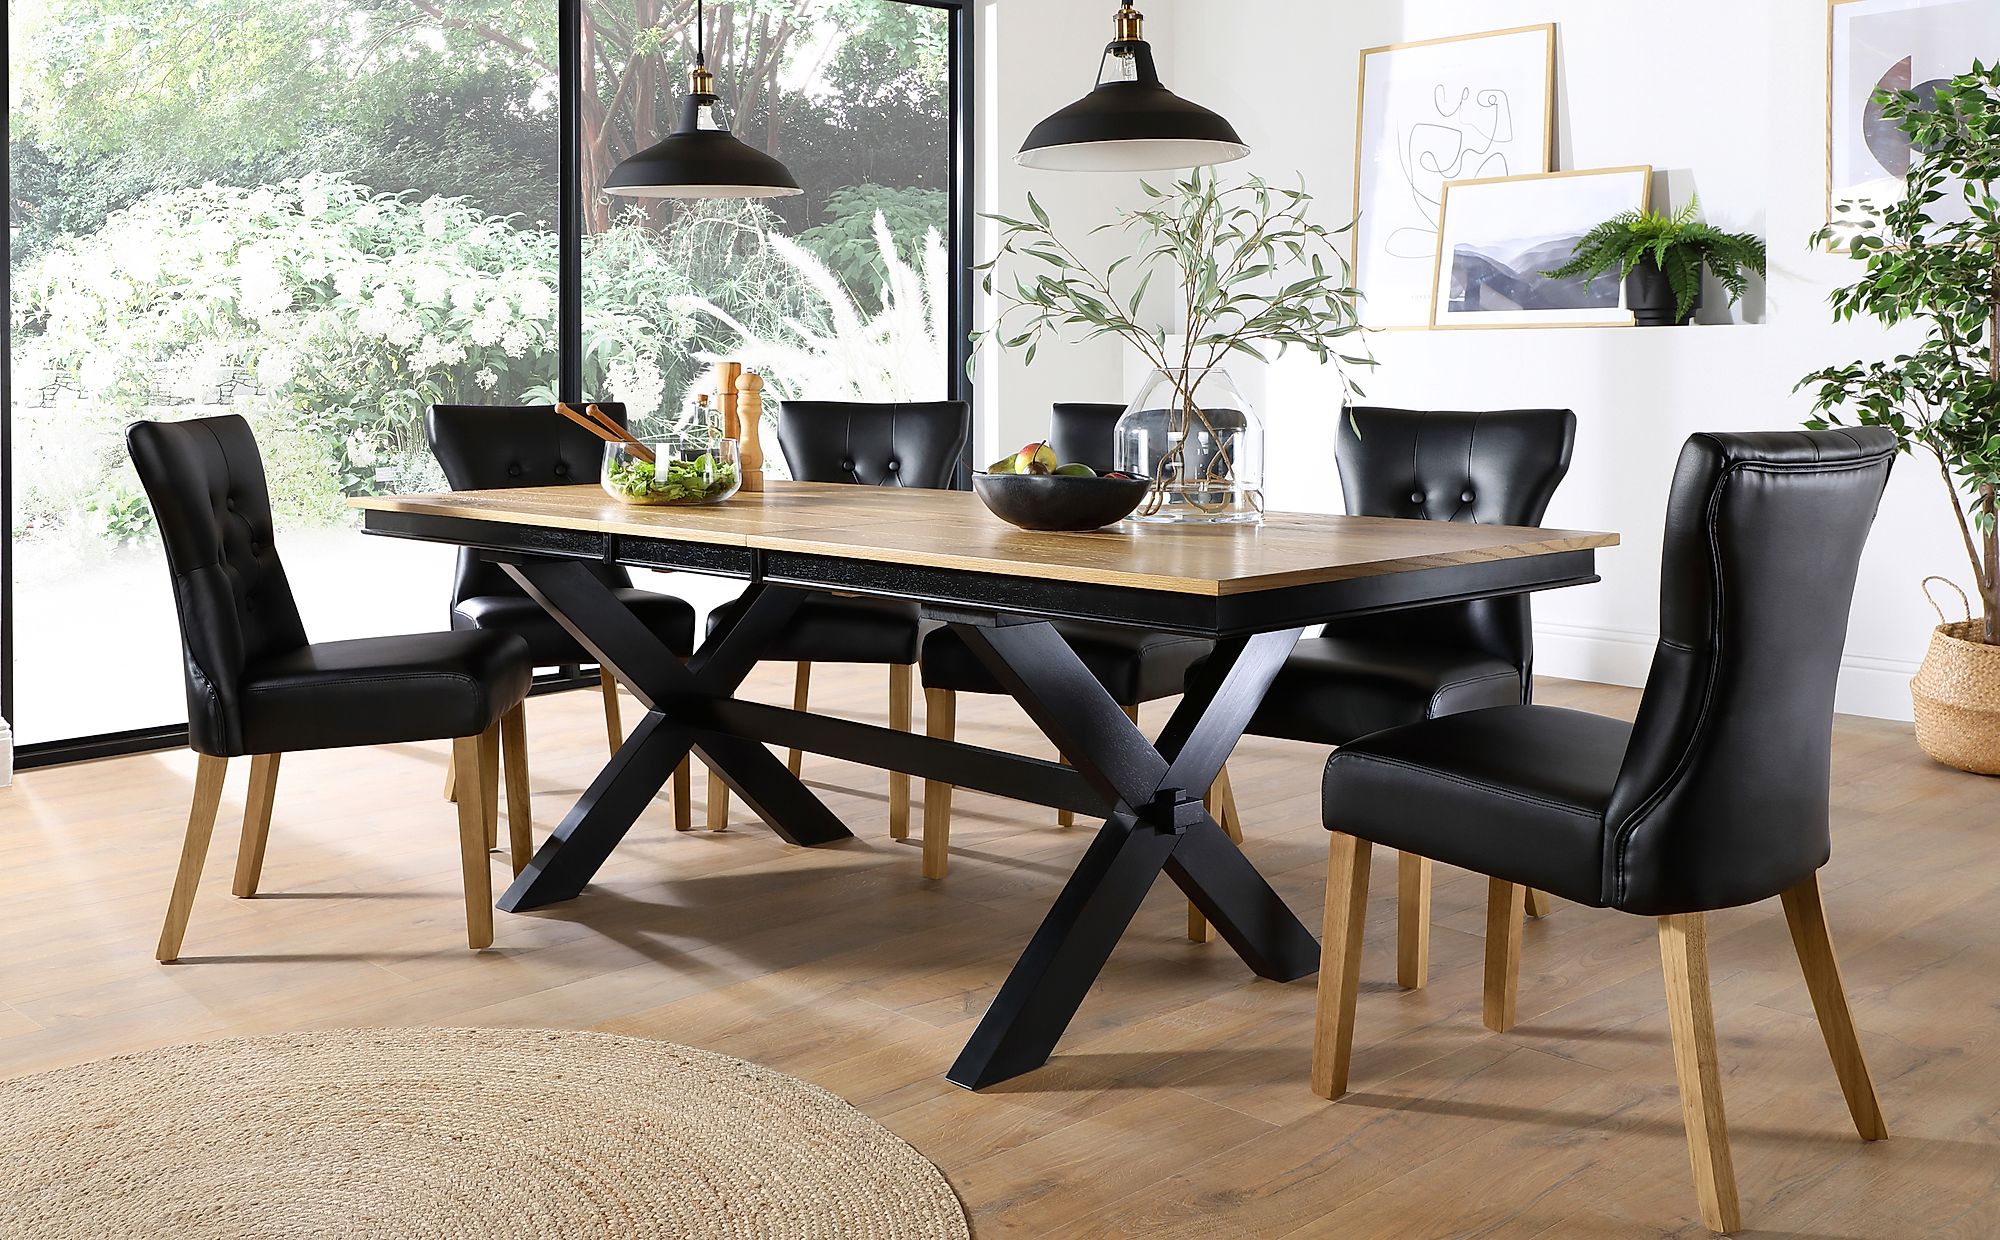 Extending Dining Room Table And 4 Chairs / 20 Best Collection of Small